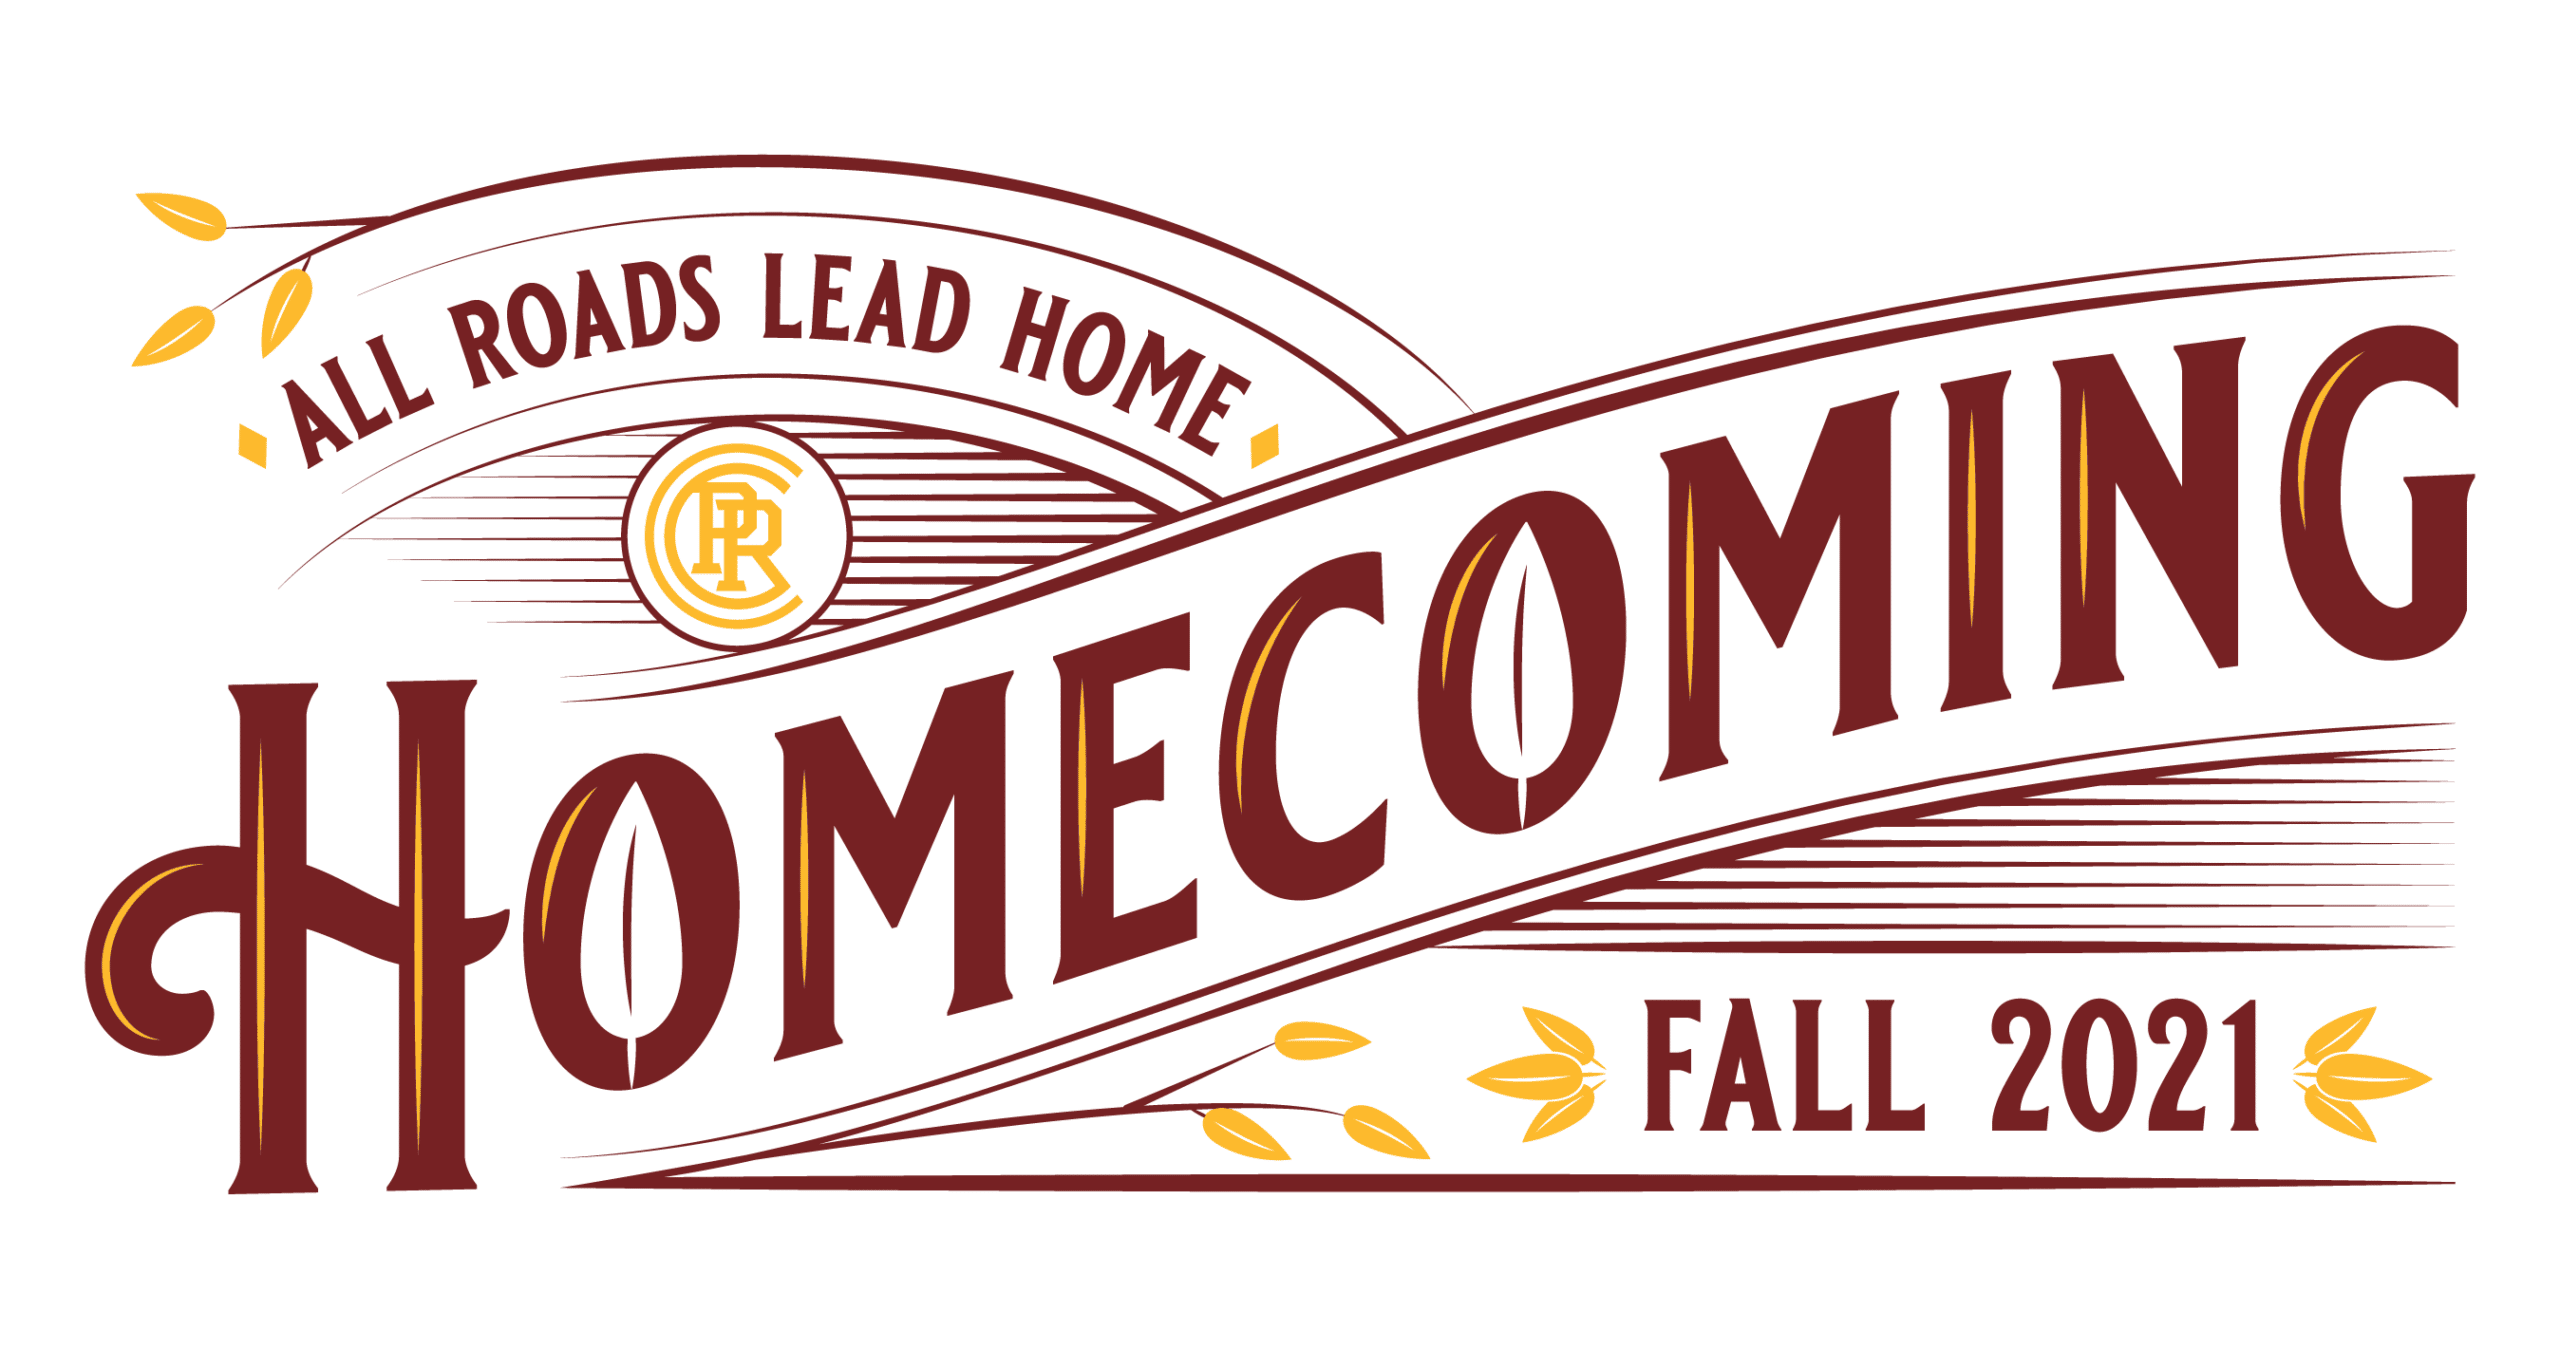 All Roads Lead Home PRCC Homecoming 2021